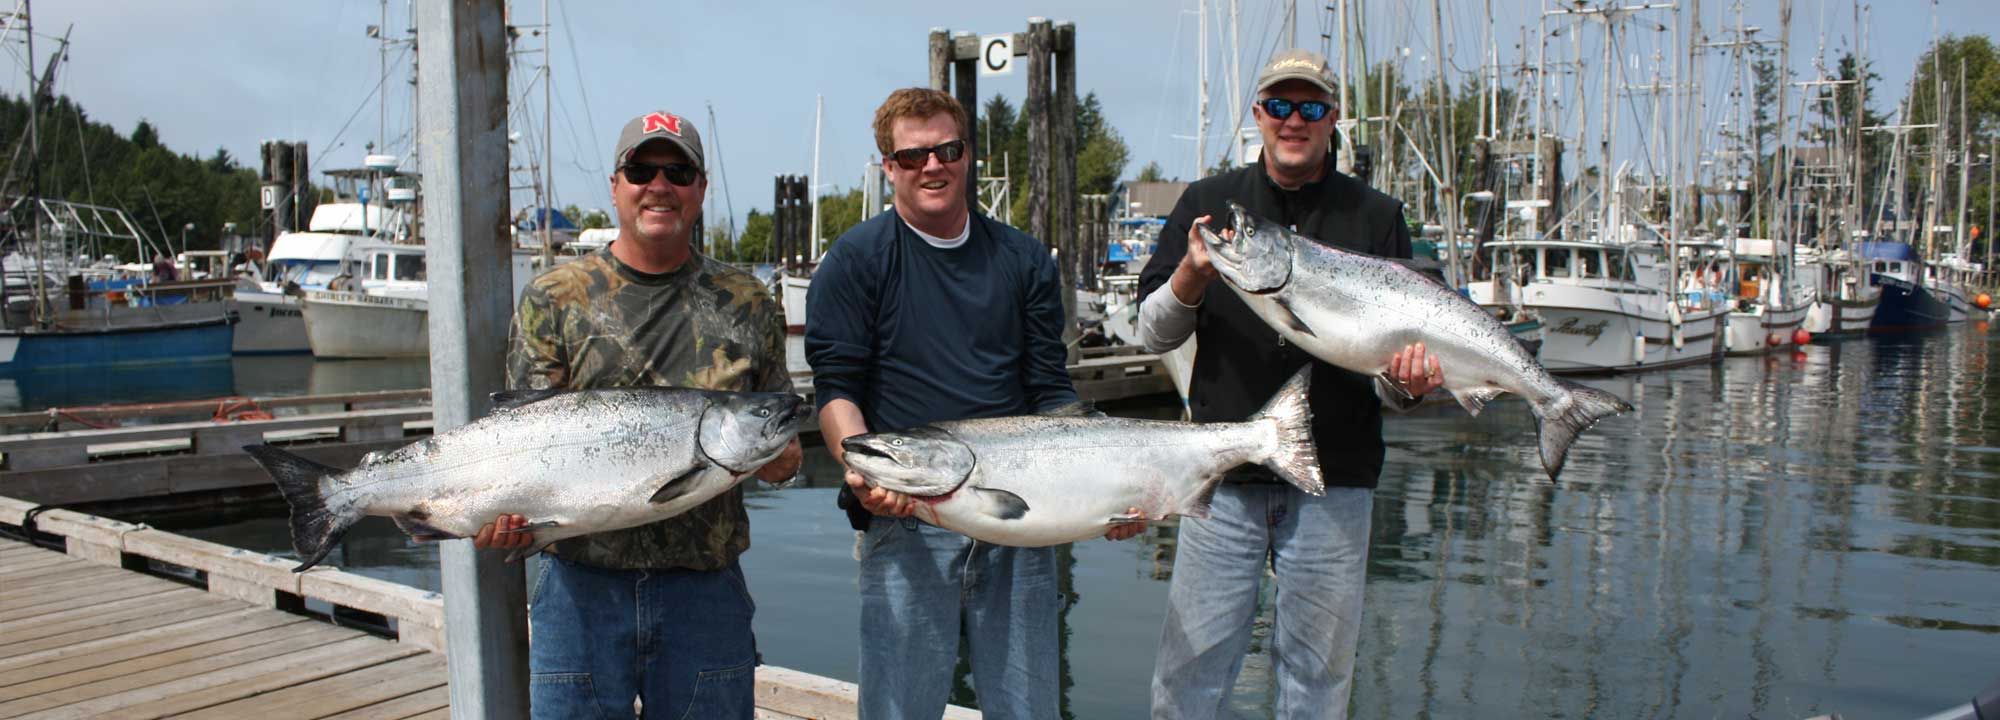 Salmon Eye Charters - Fishing with Bait or Lures?